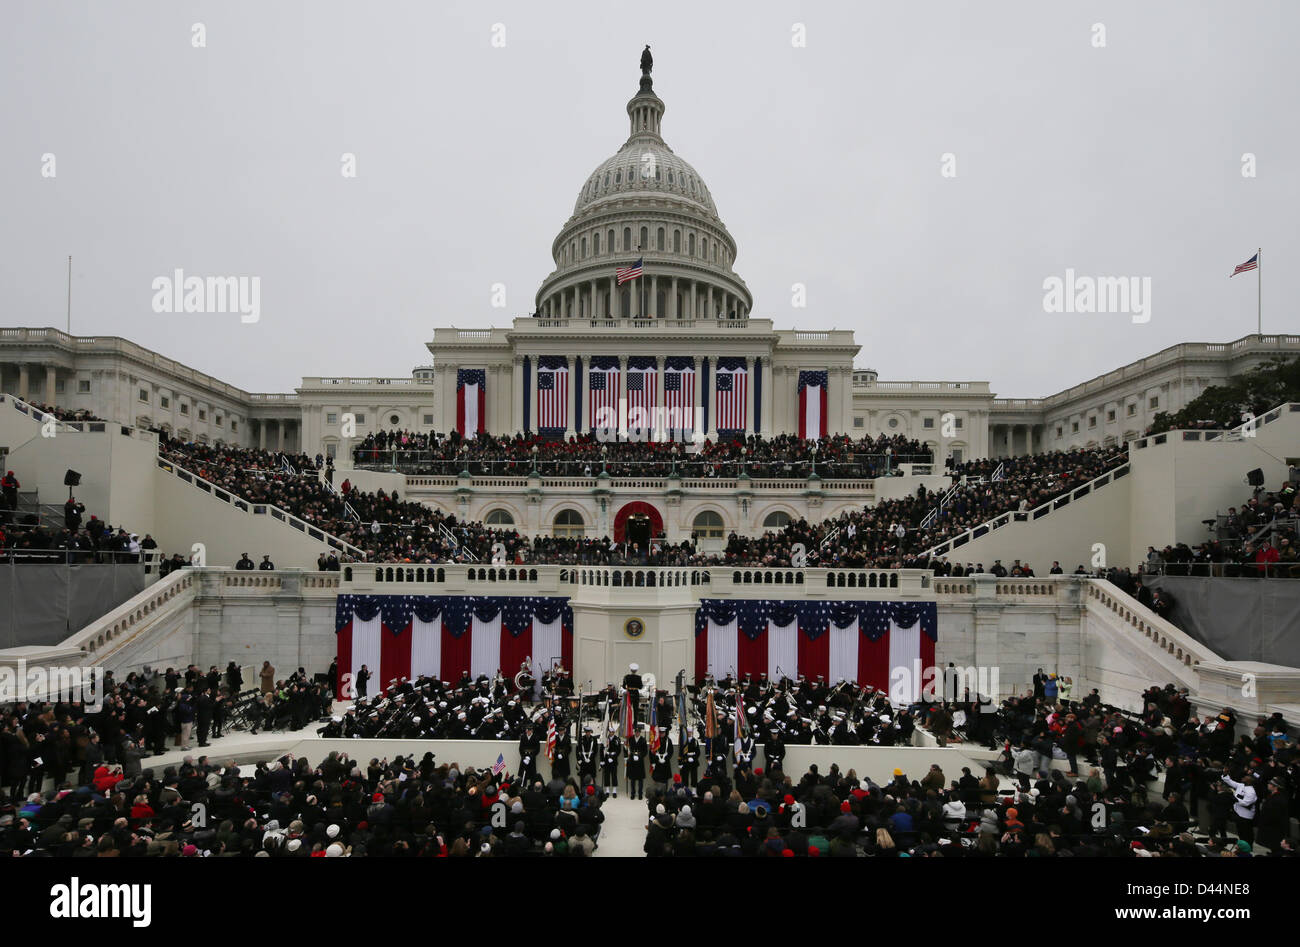 United States President Barack Obama waves to spectators after his speech at the ceremonial swearing-in at the U.S. Capitol during the 57th Presidential Inauguration in Washington, Monday, January 21, 2013. Credit: Scott Andrews / Pool via CNP Stock Photo